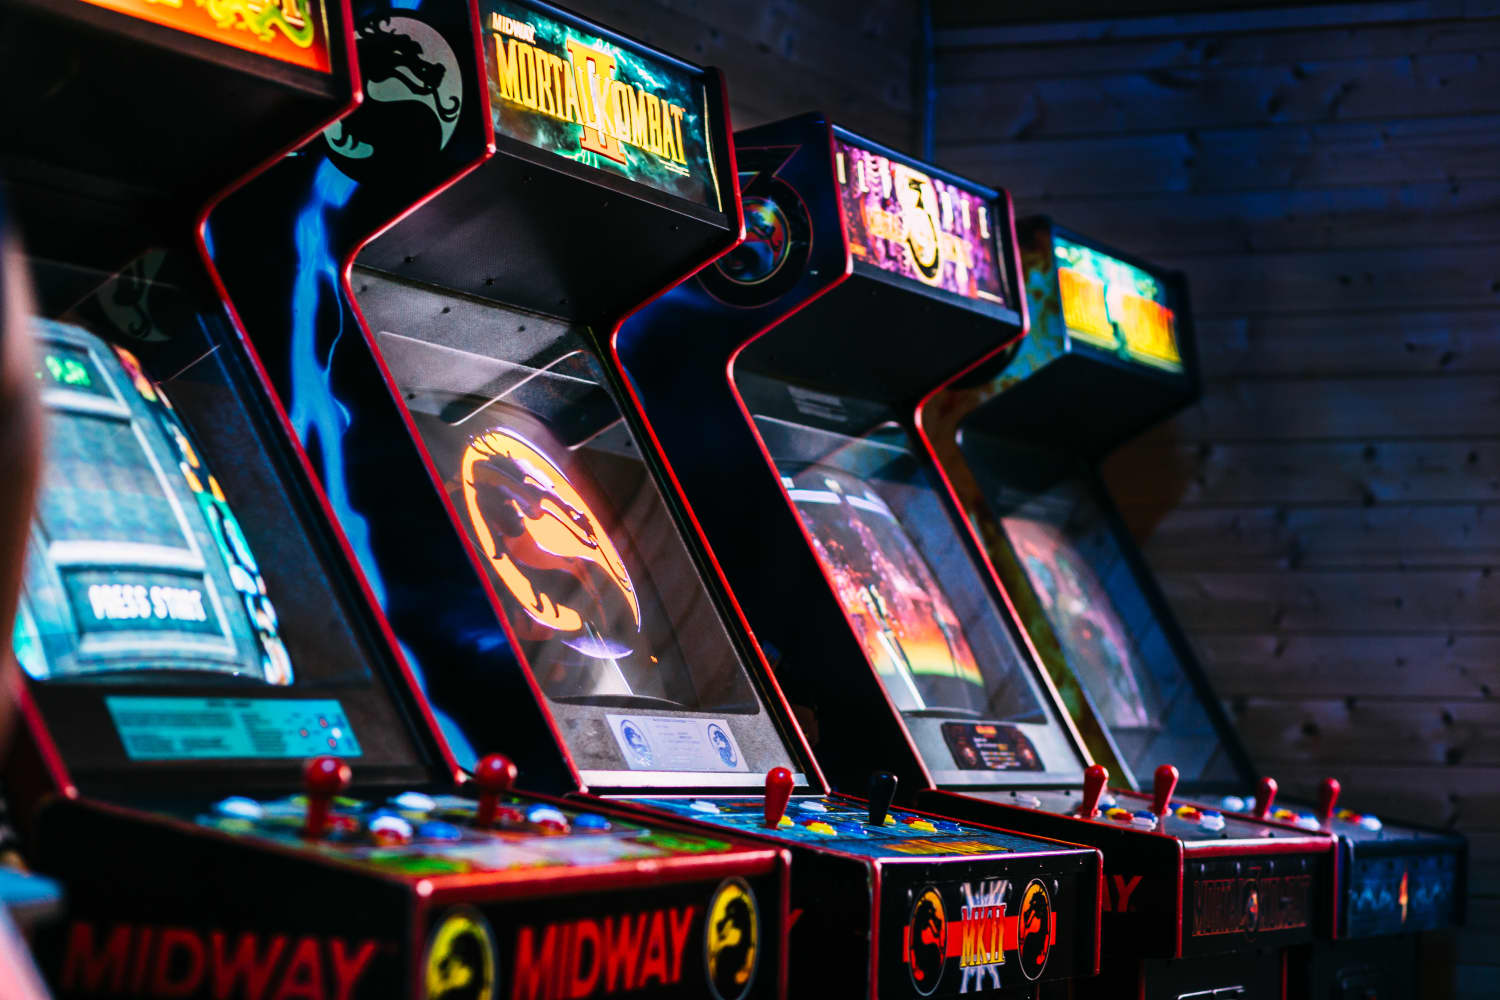 5 Perks Of Playing Online Arcade Games